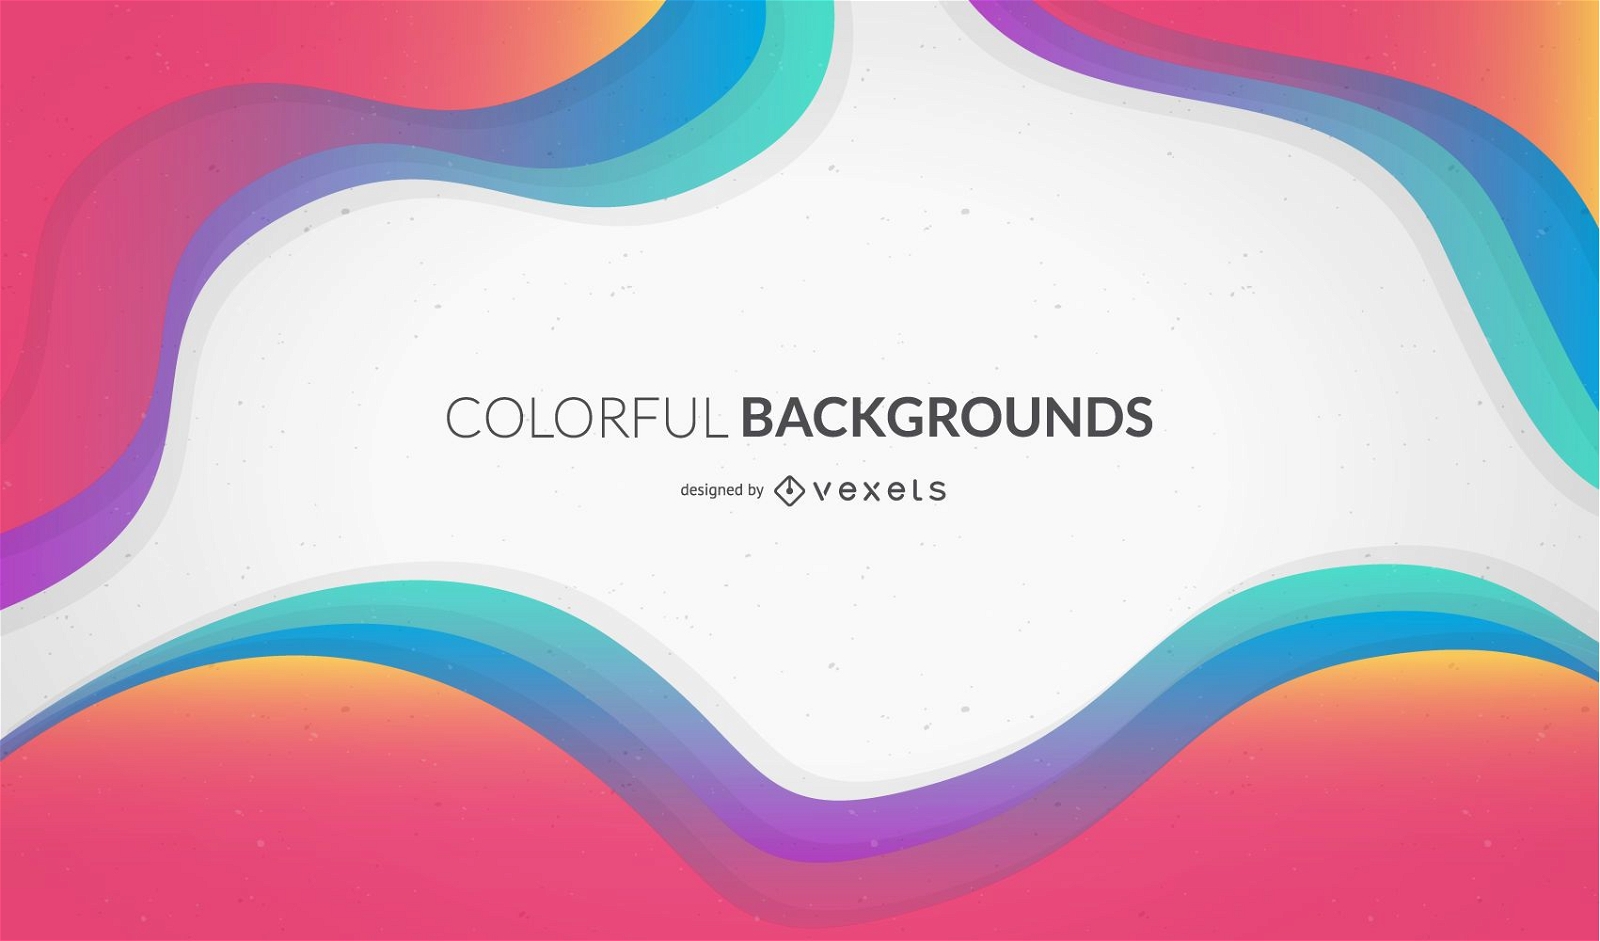 Colorful wavy background design